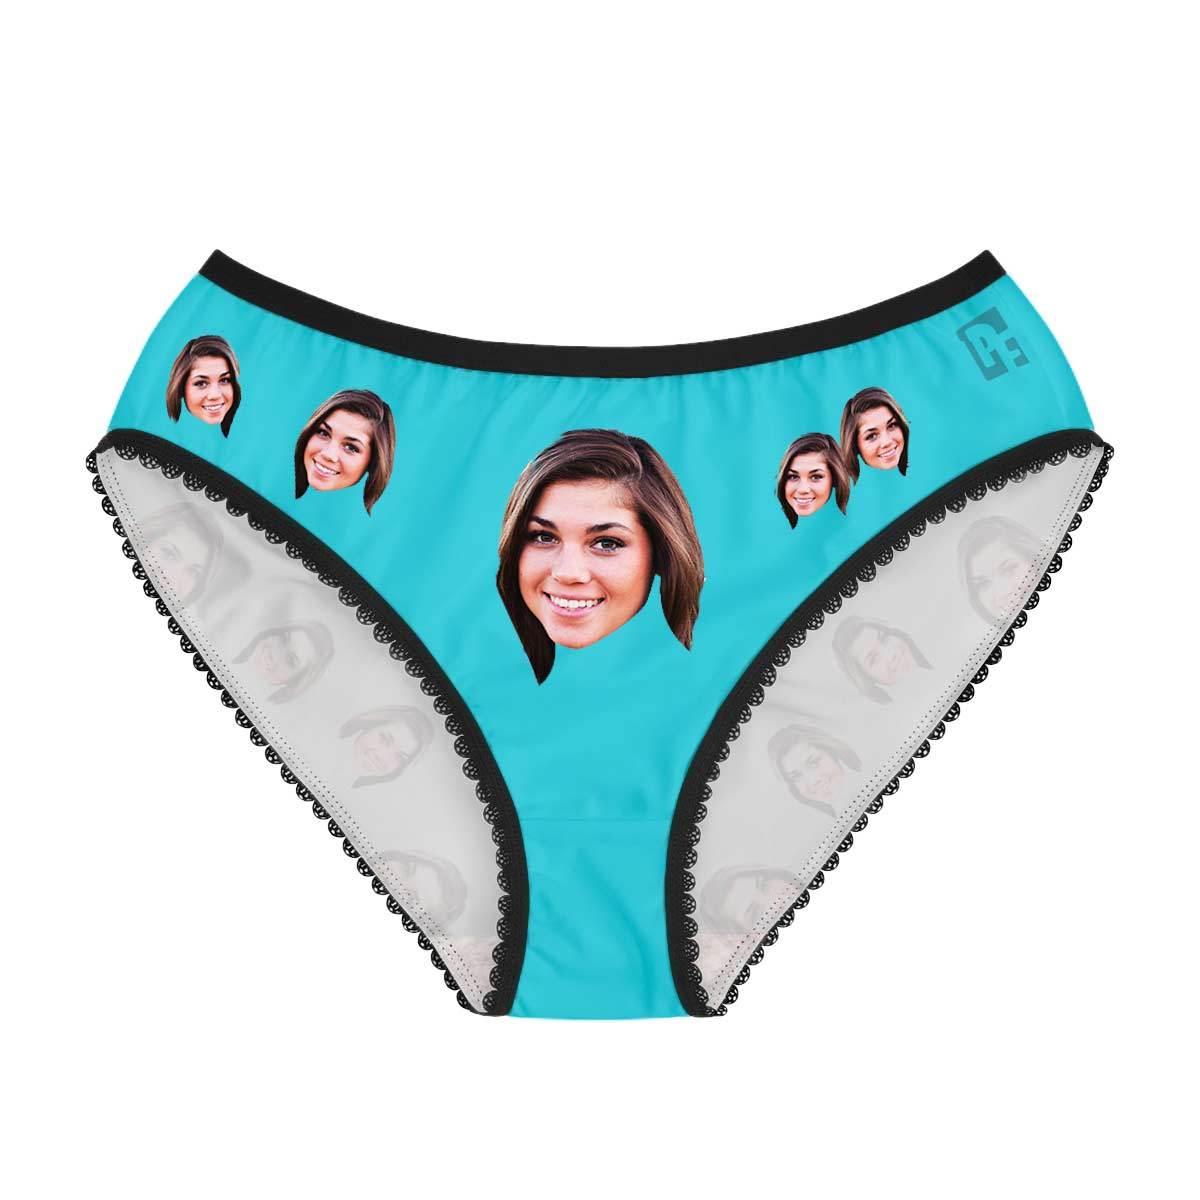 Mint Blank Design women's underwear briefs personalized with photo printed on them